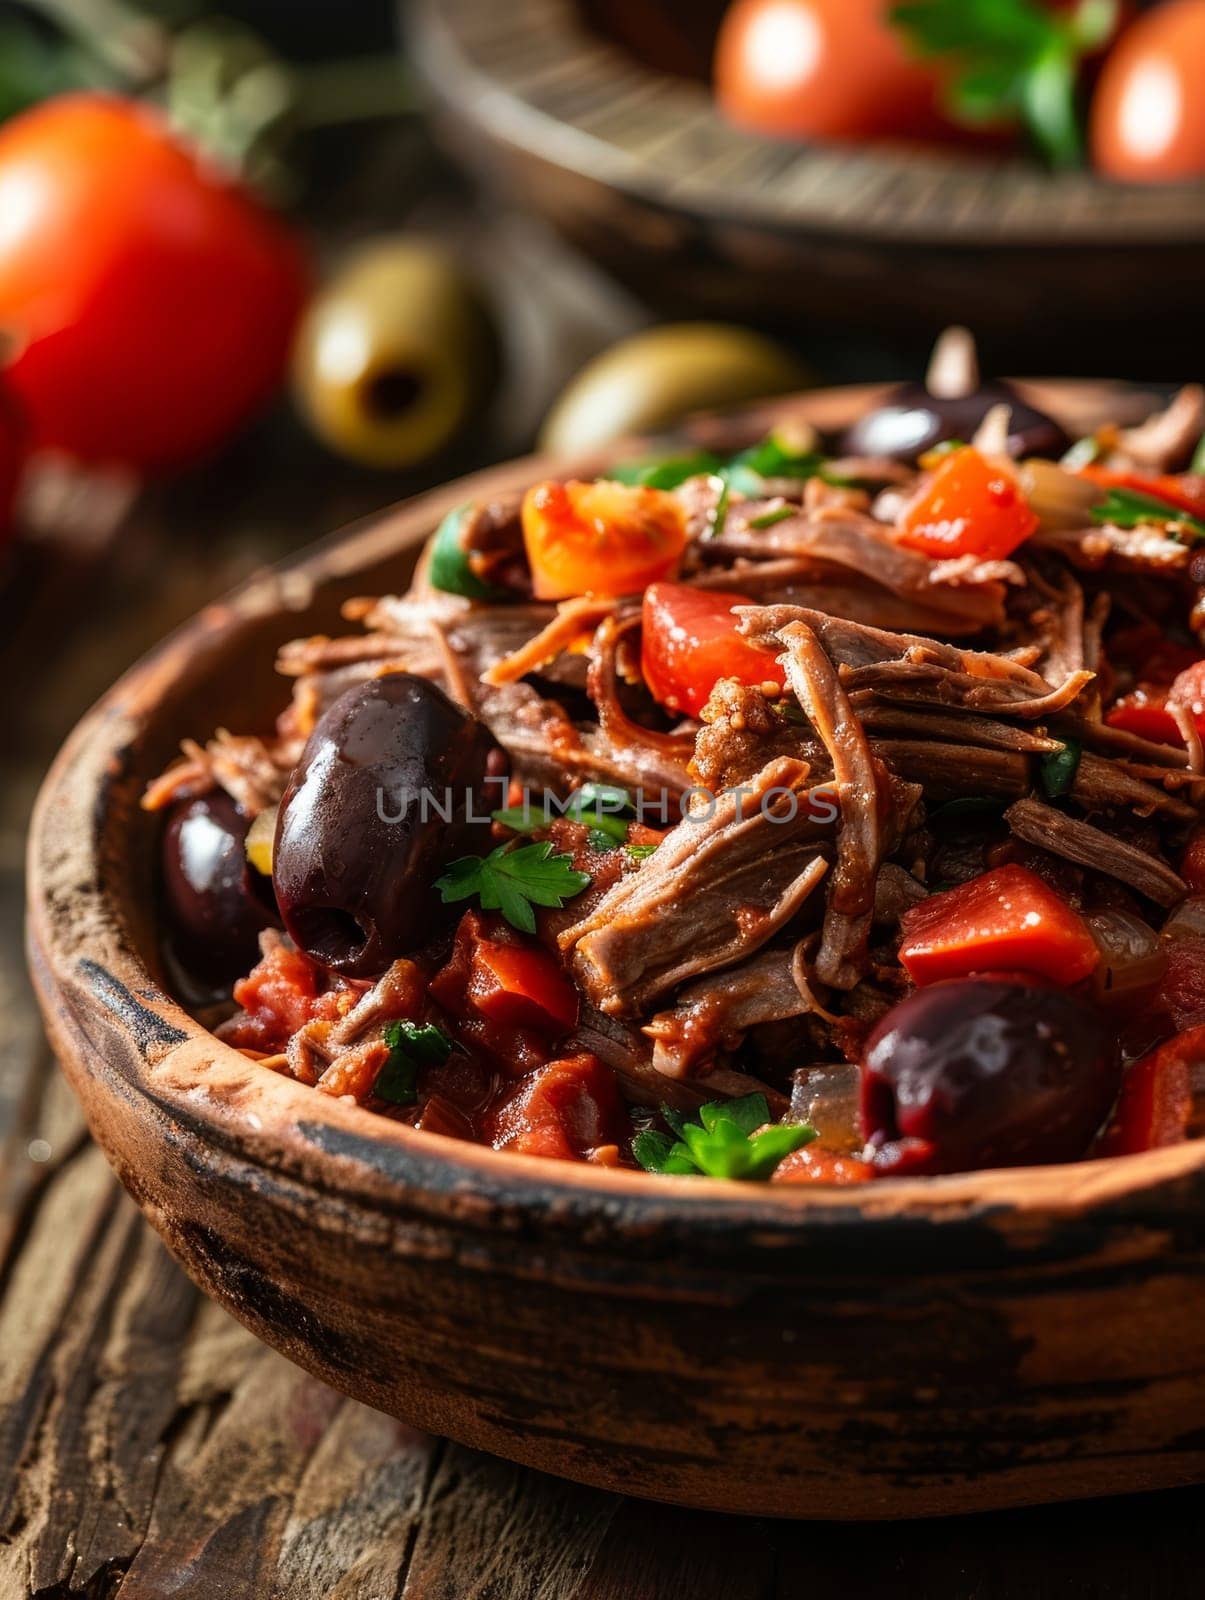 Authentic Cuban ropa vieja, a traditional shredded beef dish simmered with tomatoes, olives, and fragrant spices. Comforting Latin American staple is a delicious representation of Cuban culinary. by sfinks